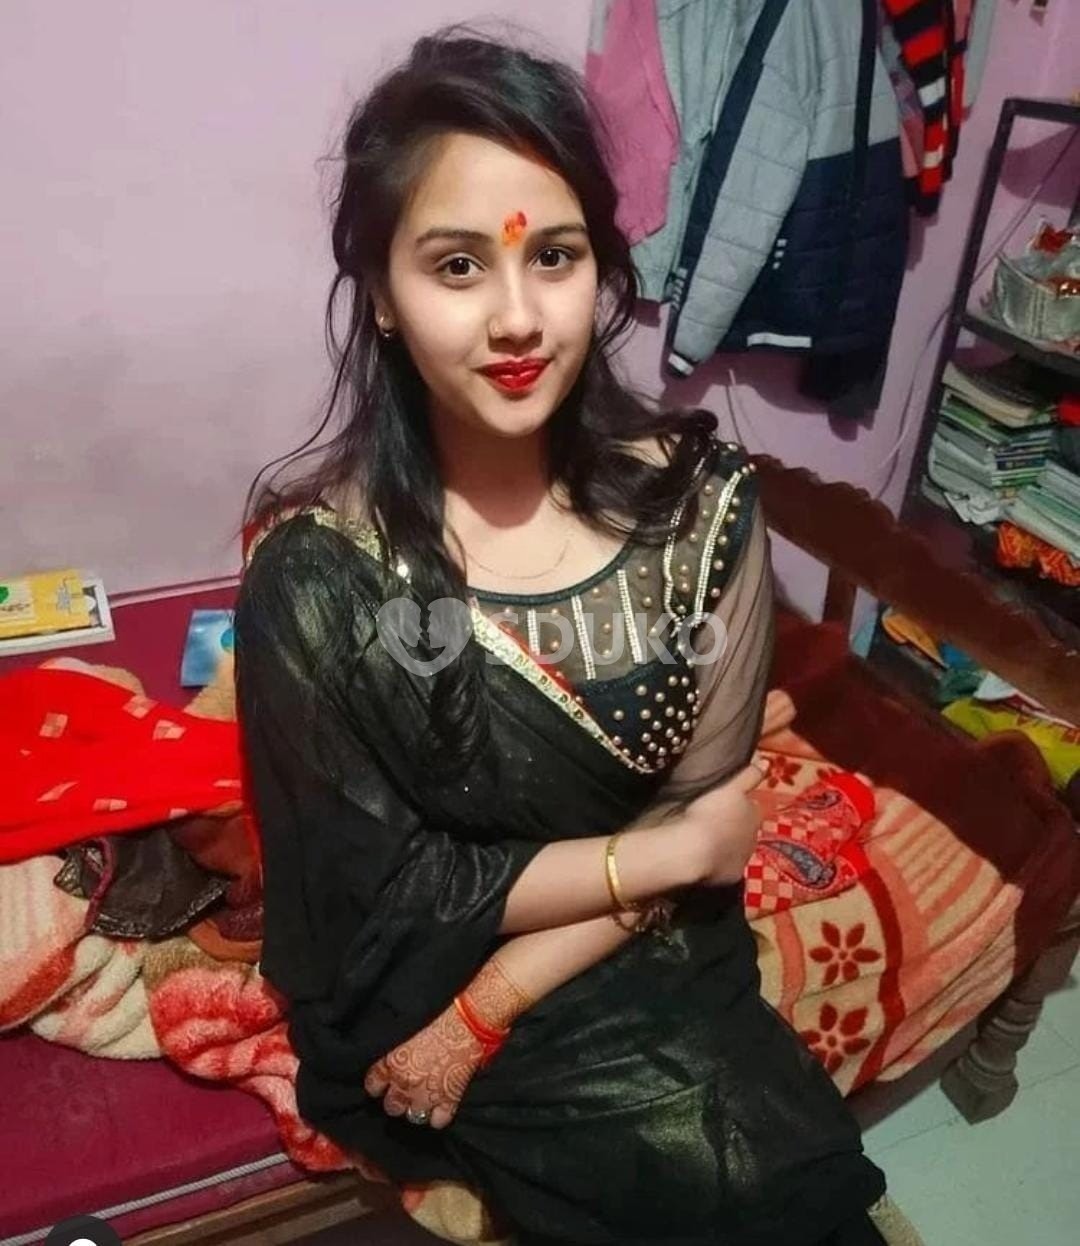 HITEC CITY_TODAY_ LOW PRICE_GENUINE SERVICE ALL TYPE GIRLS AVAILABLE_NEW GOOD LOOKING STAFF AVAILABLE CALL ME